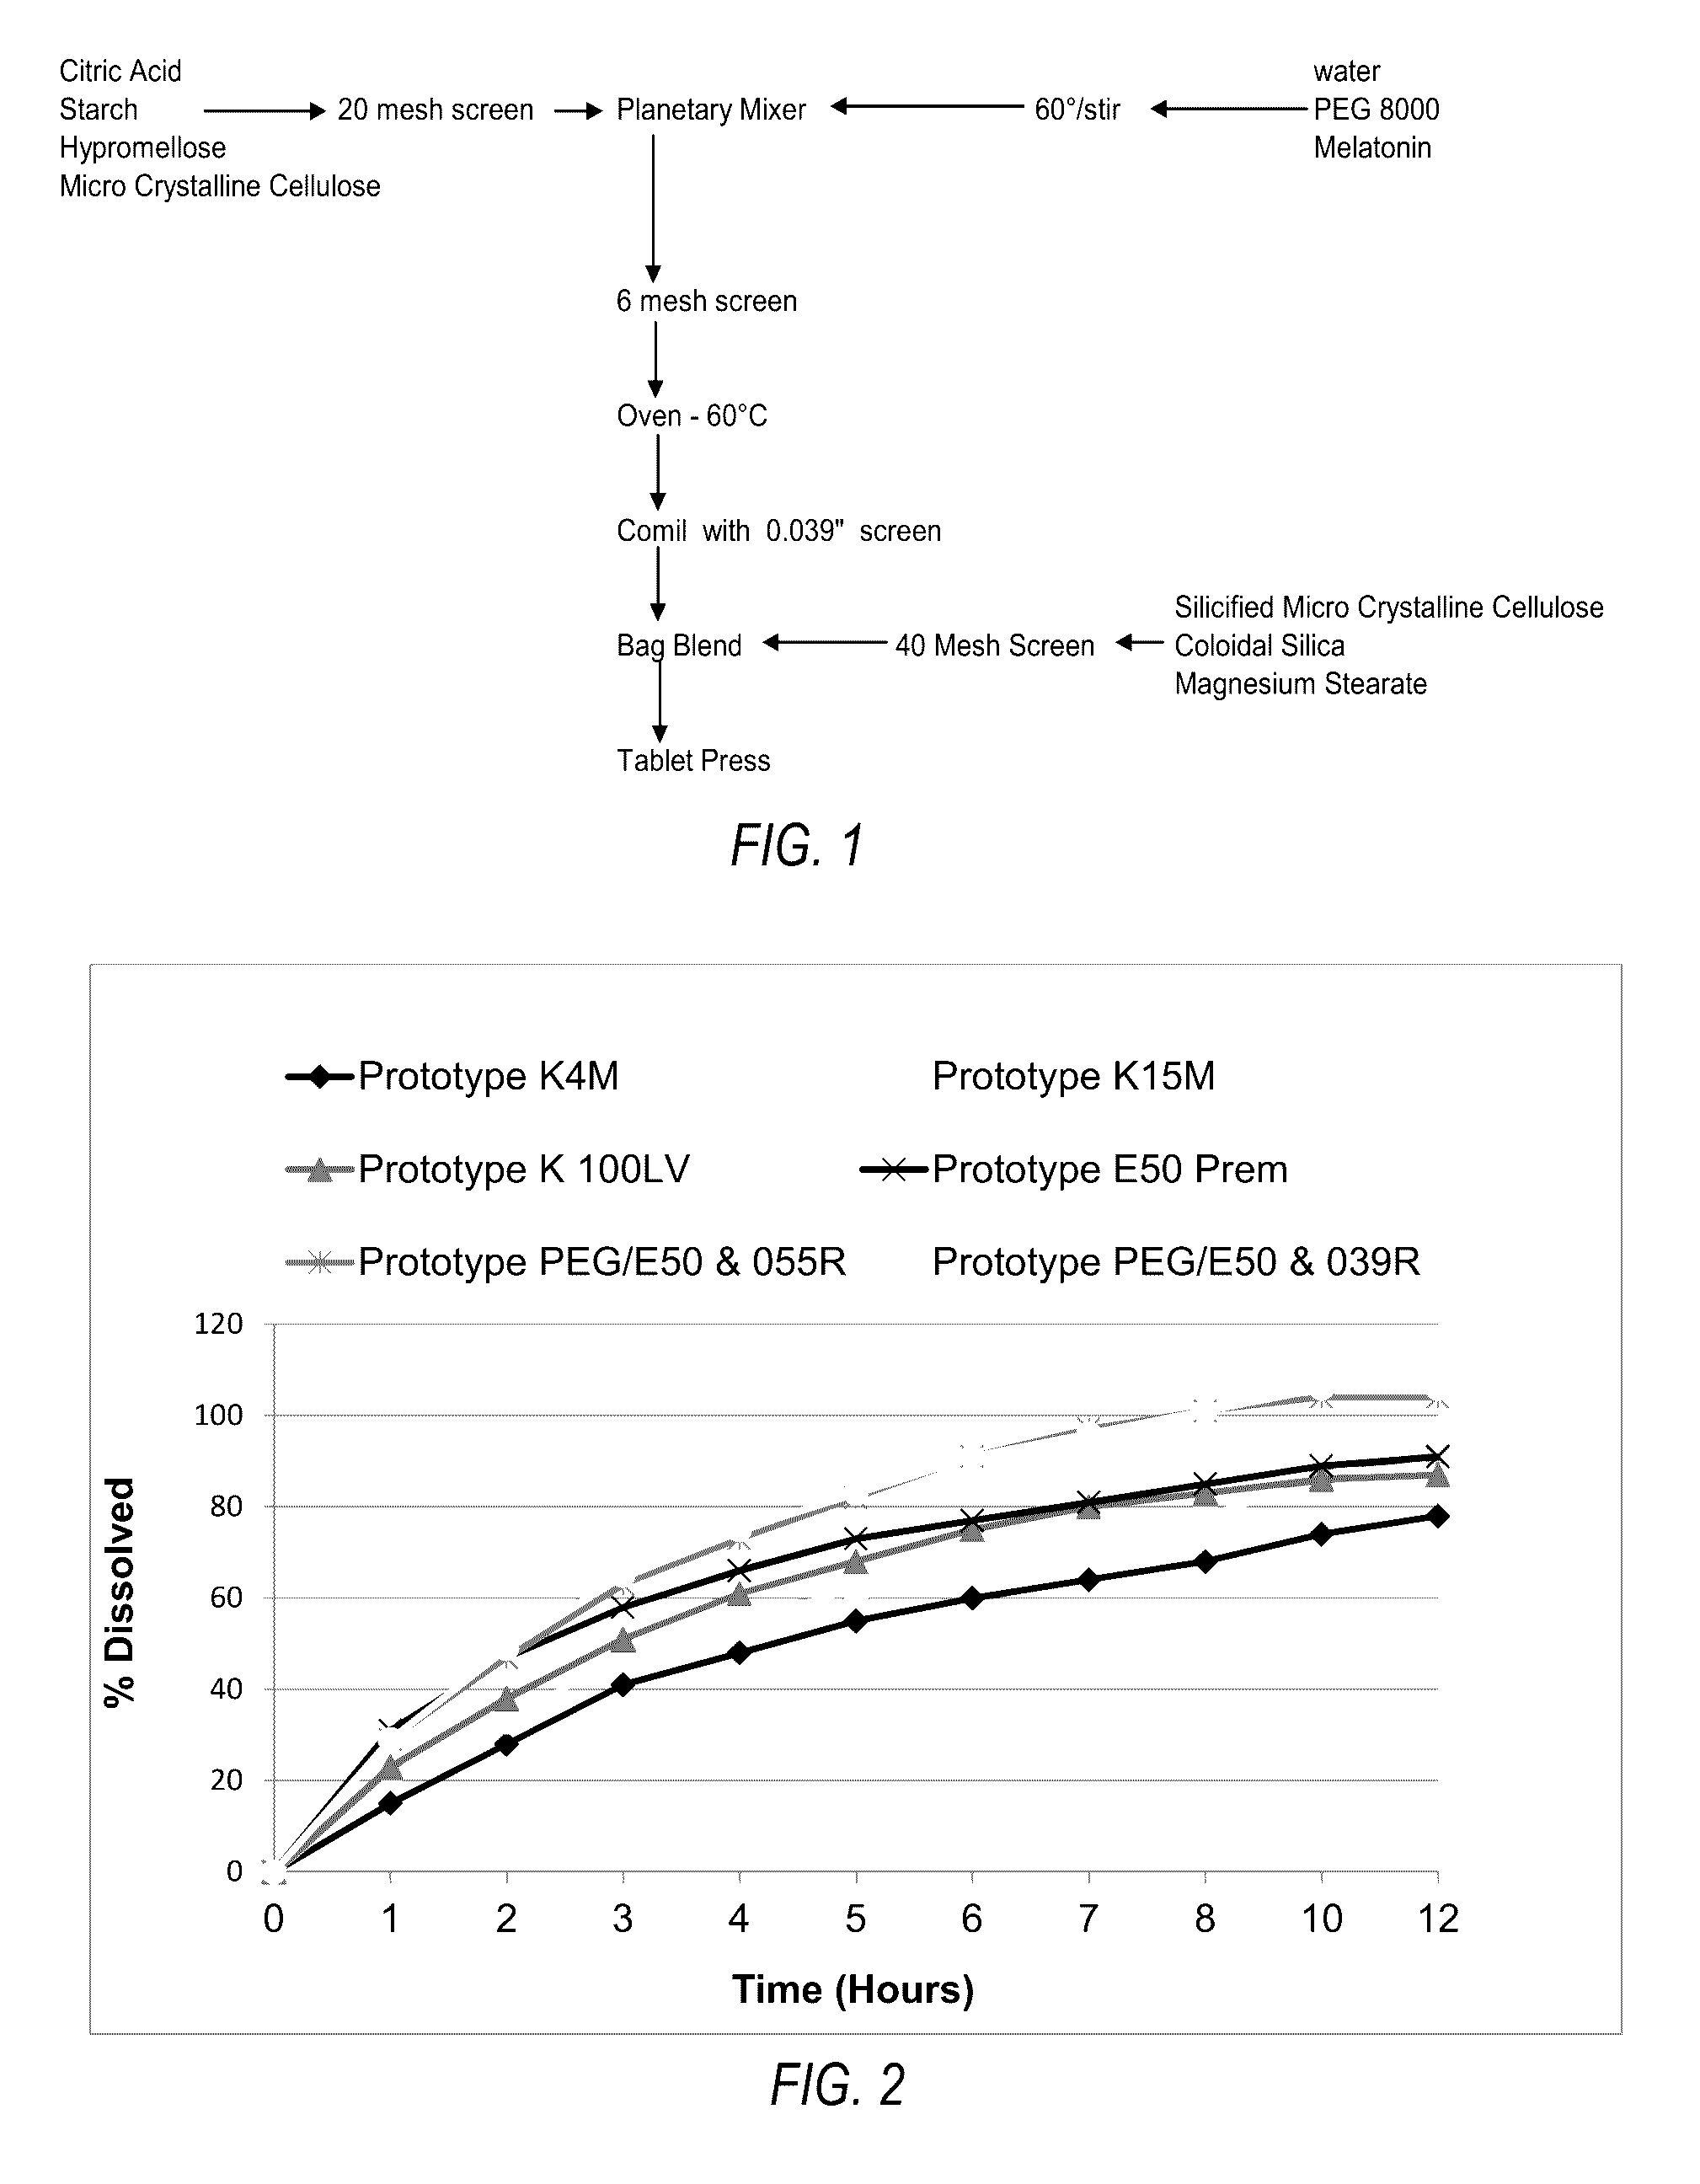 Controlled-release compositions of melatonin combined with sedative and/or analgesic ingredients